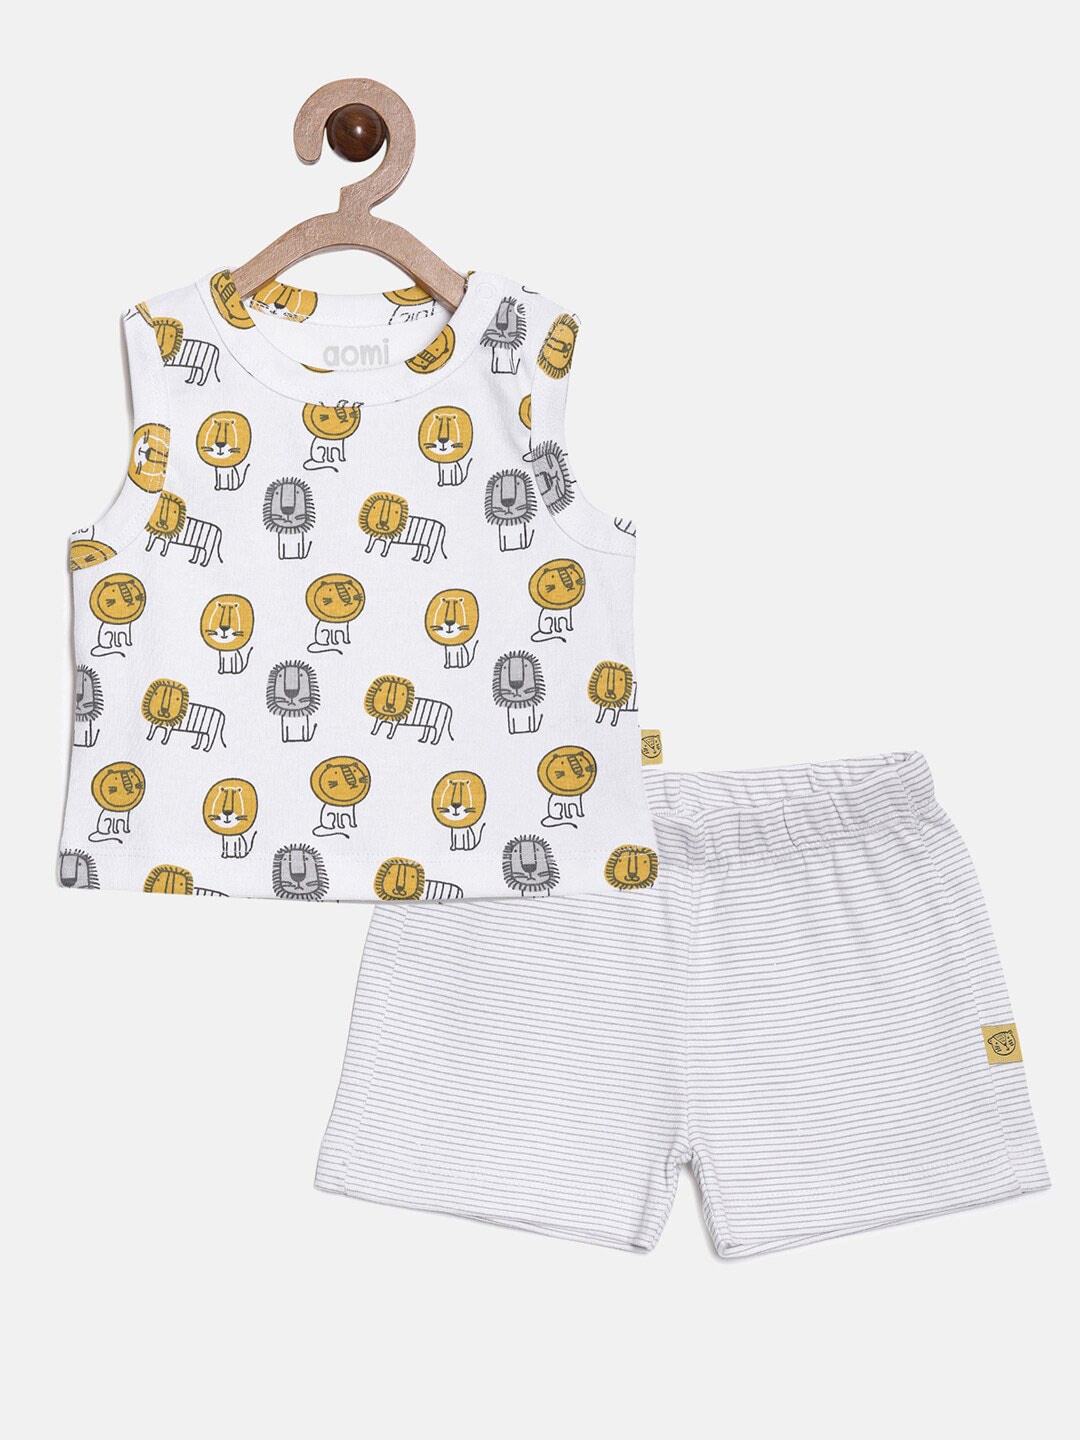 Aomi Boys White Printed Cotton Top with Shorts